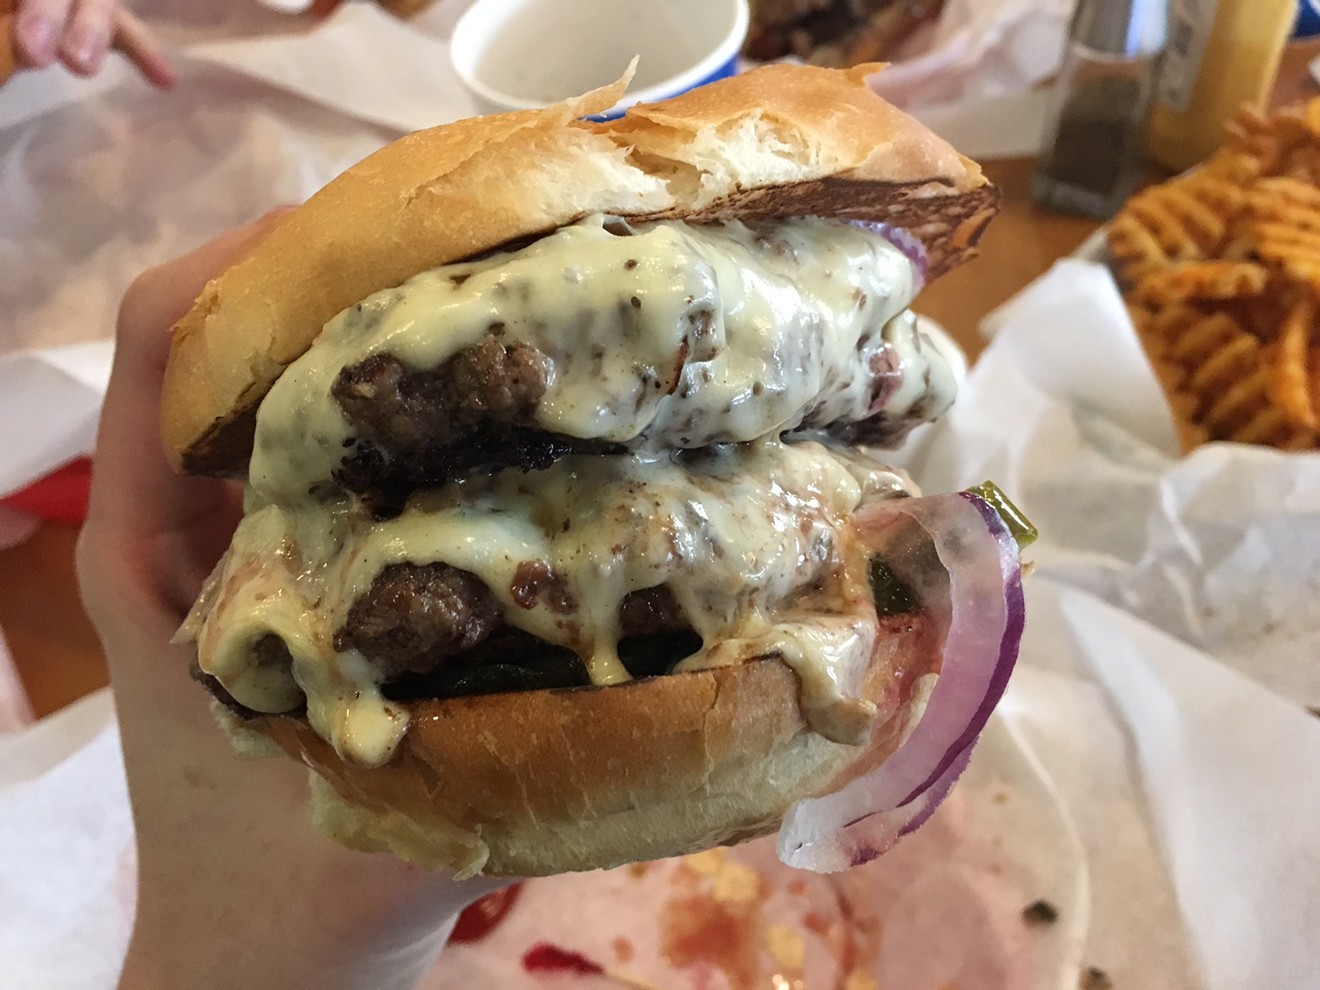 The Benderz double cheeseburger.